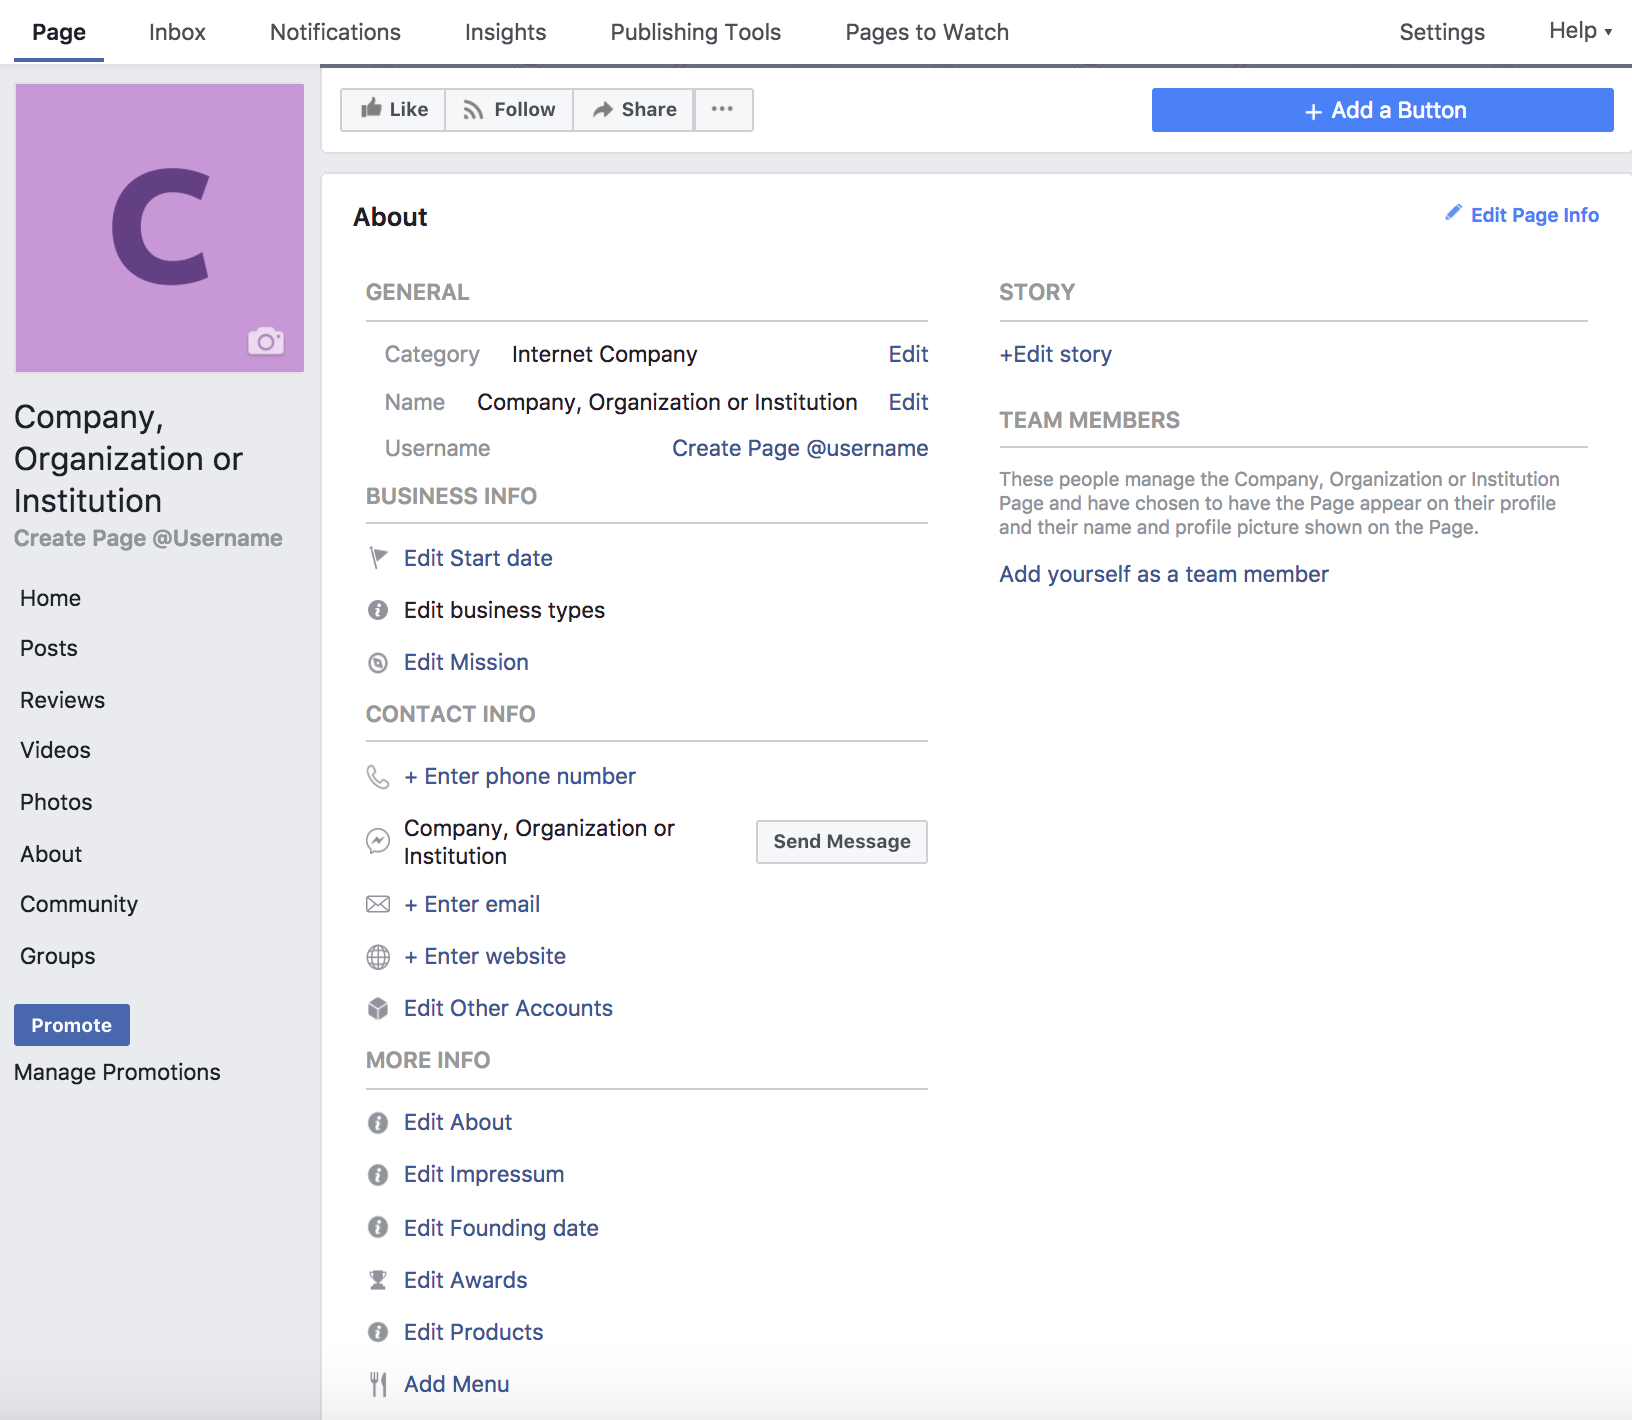 15 Tips and Tools for Better Facebook Management